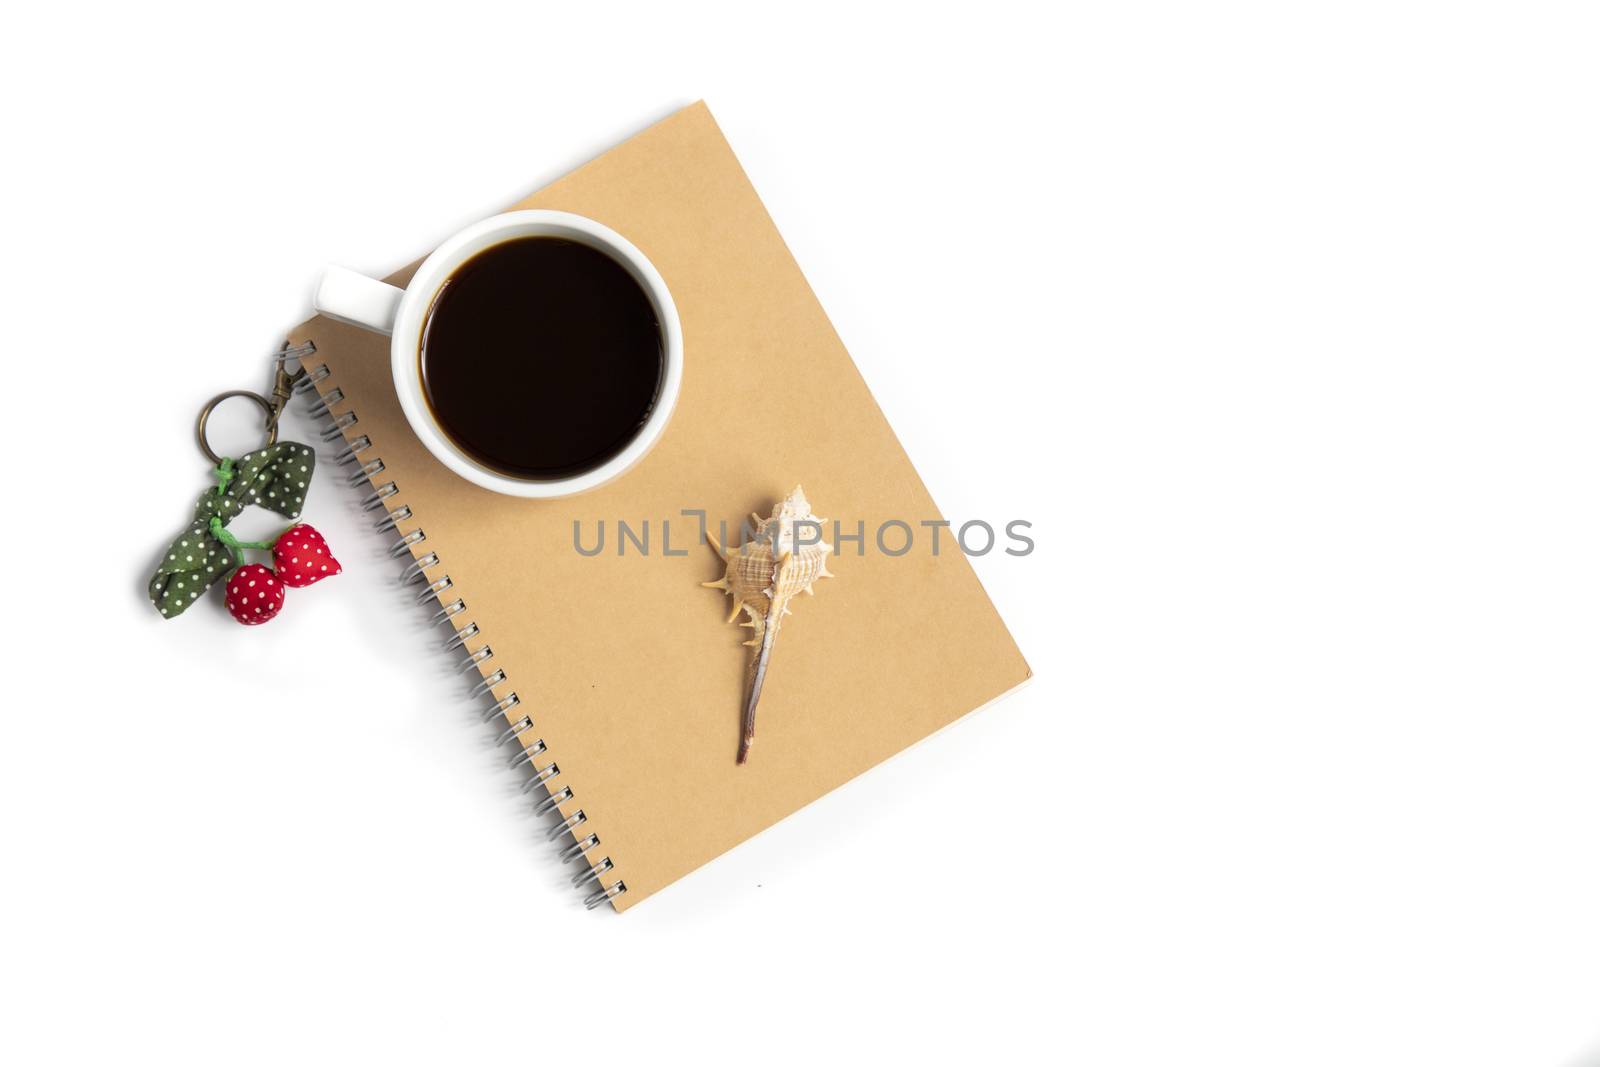 A white cup with black coffee and a seashell with colorful key chain on a brown notebook. Isolated on white background. Summer vacation concepts.